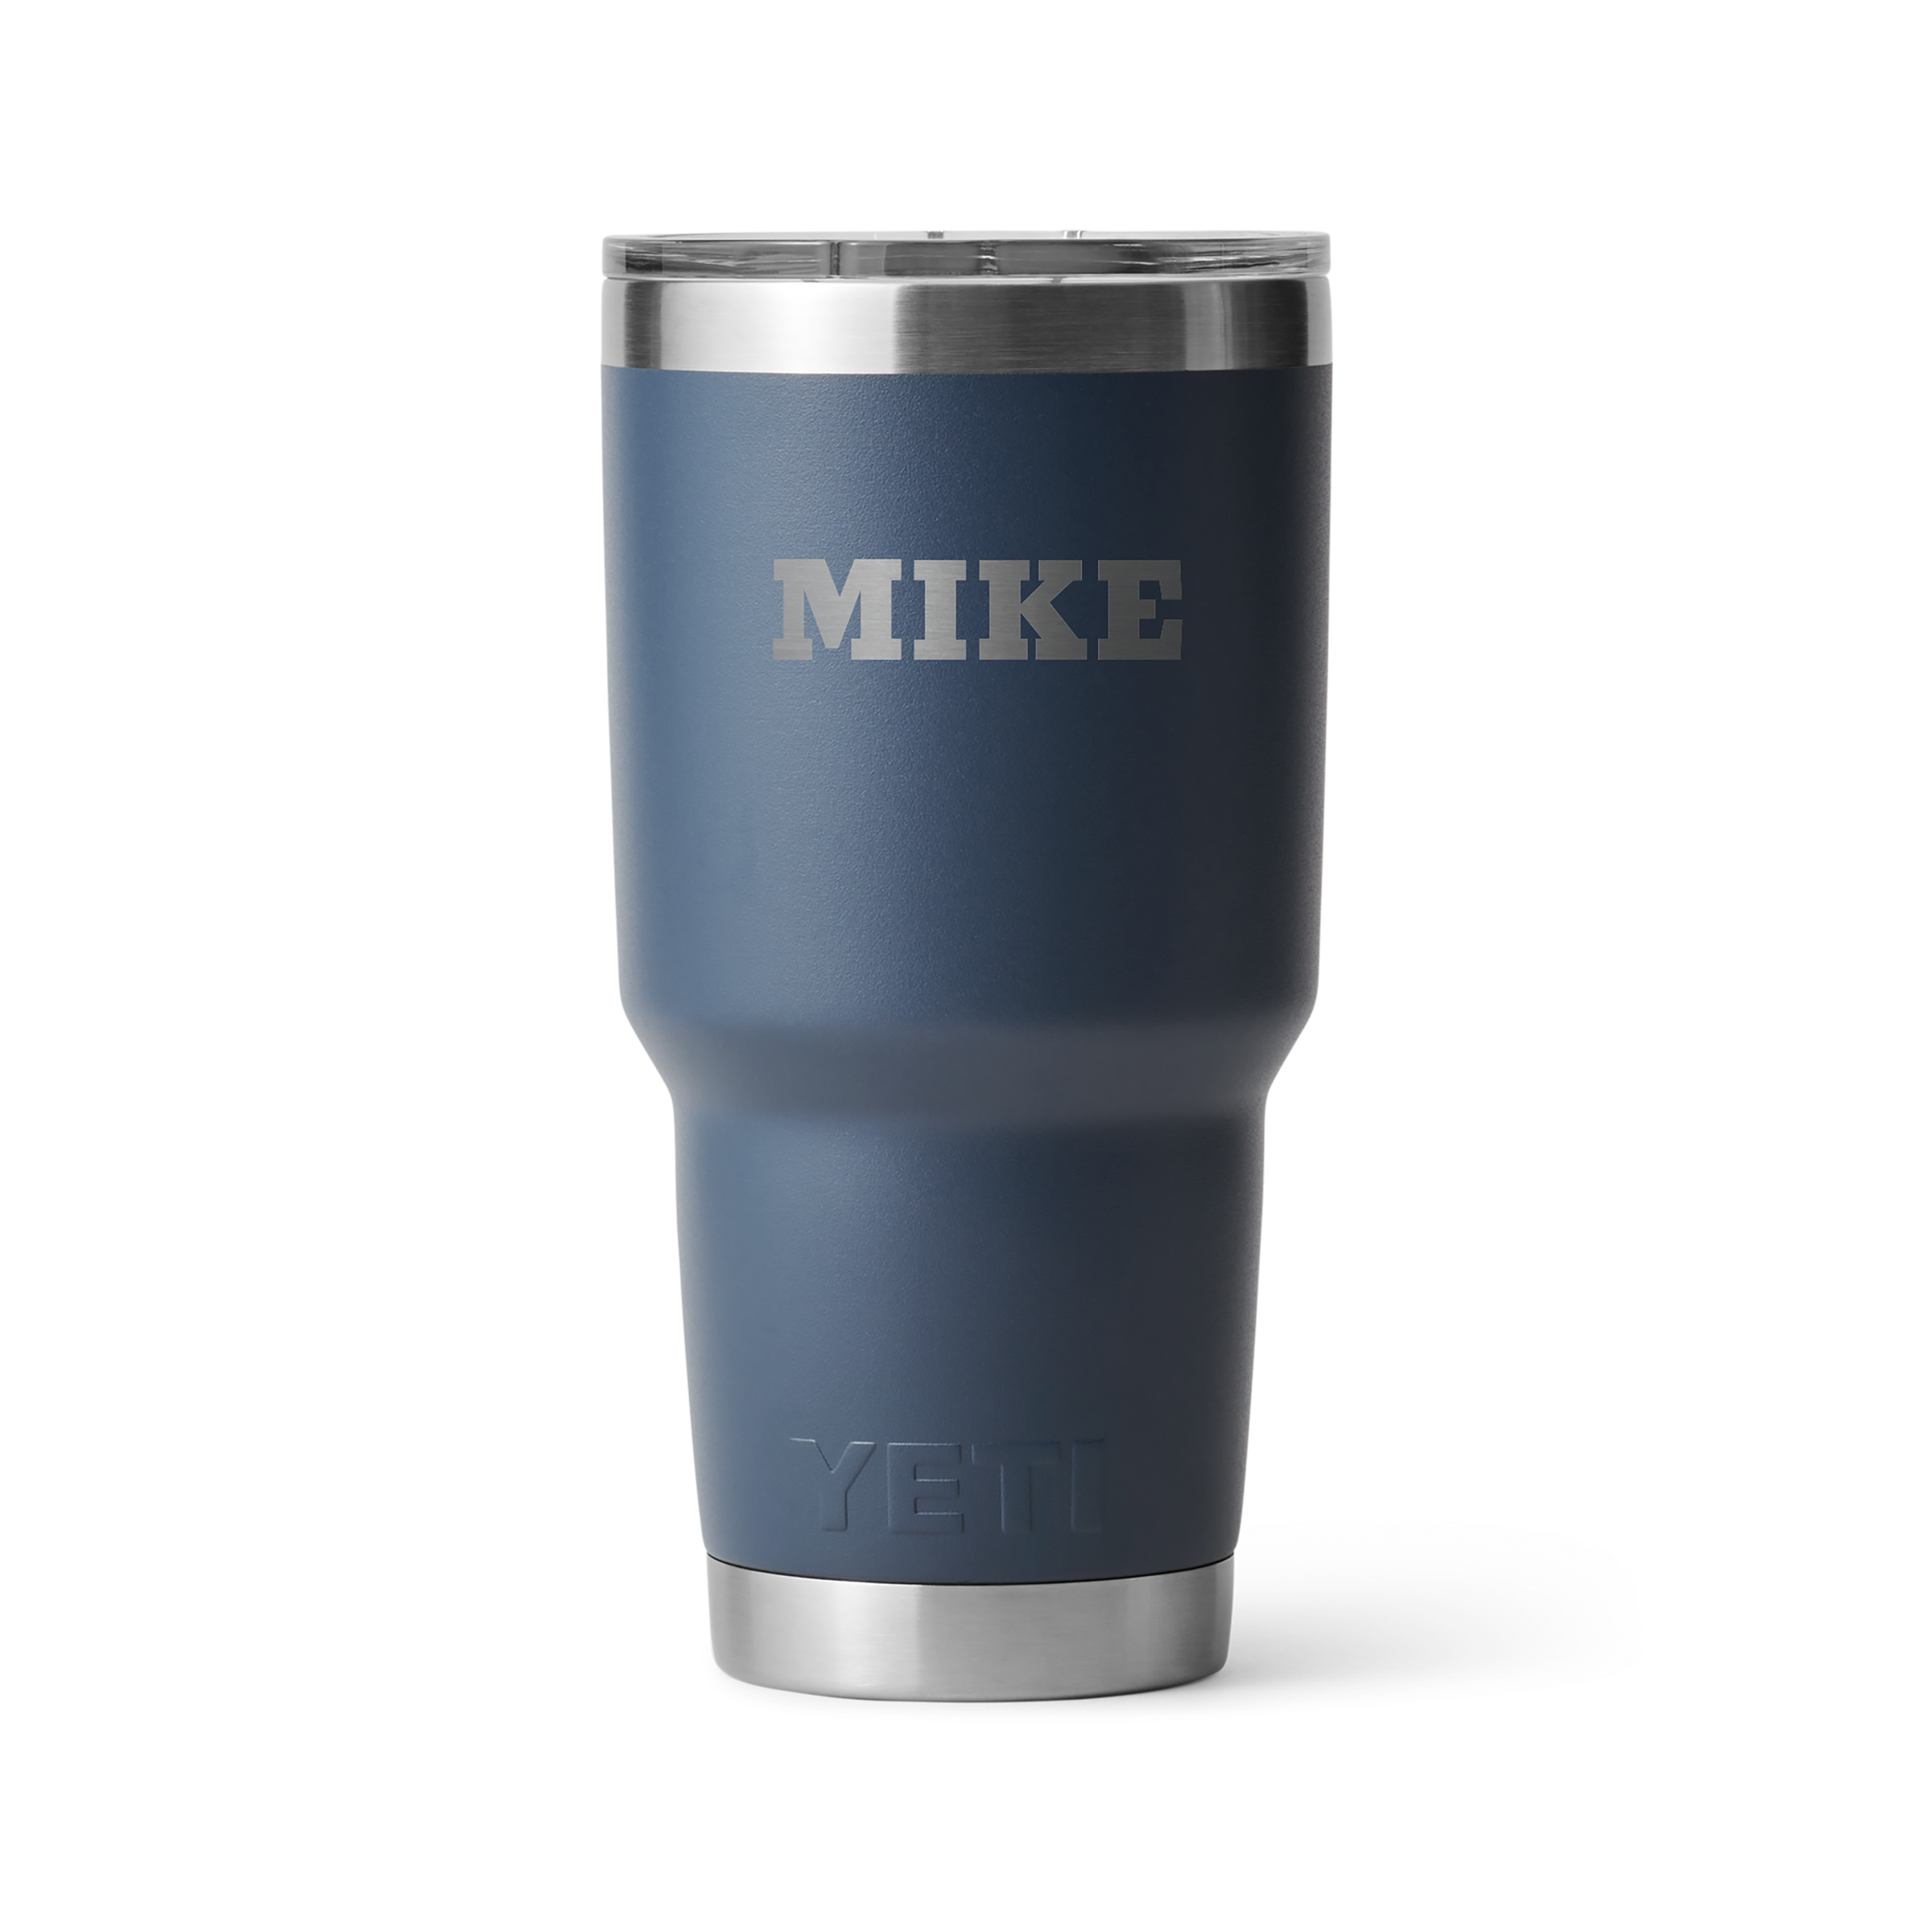 https://yeti-web.imgix.net/37baf29b5cbbef6c/original/PLP2_Studio_Product_Images_Carousel_1_0_Category_Large_Custom_Design_Your_Own_Navy_30oz_Text_Drinkware_Mike_Image.png?auto=format